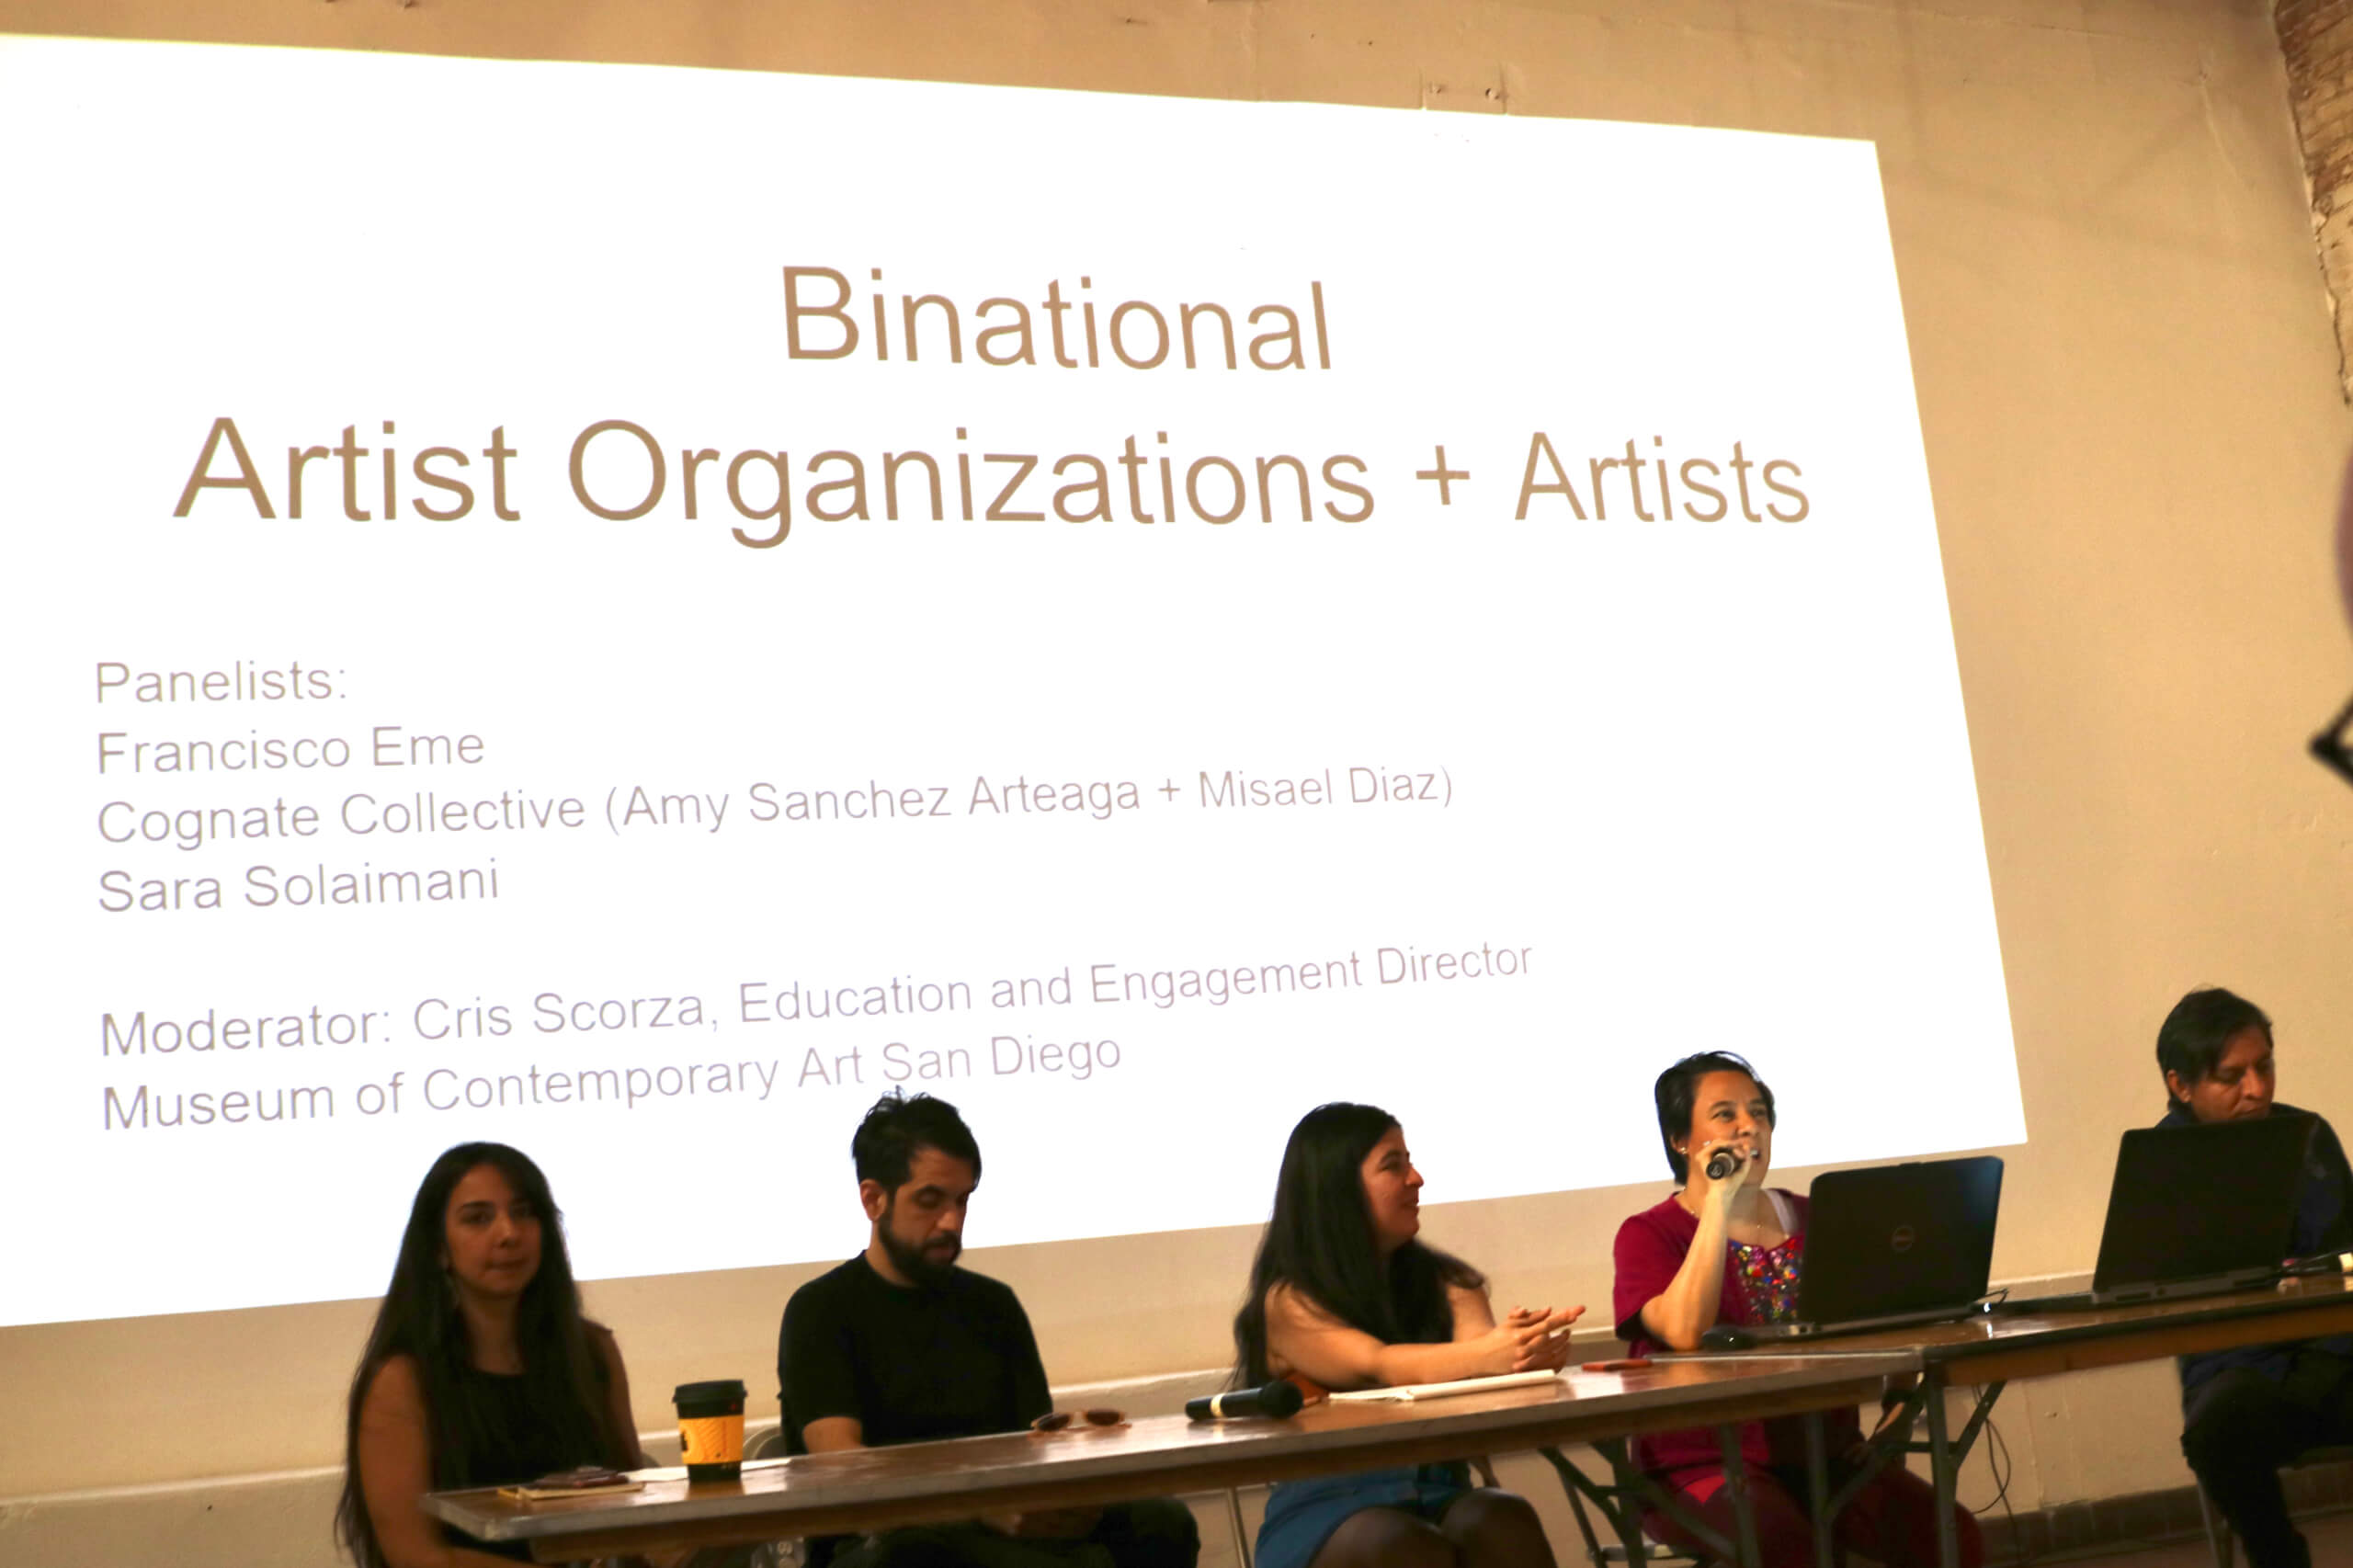 binational art historians and visual and performing artists educated the Loeb Fellowship about the history and antecedents of Chicano/Indigenous/Mexican visual arts activism.